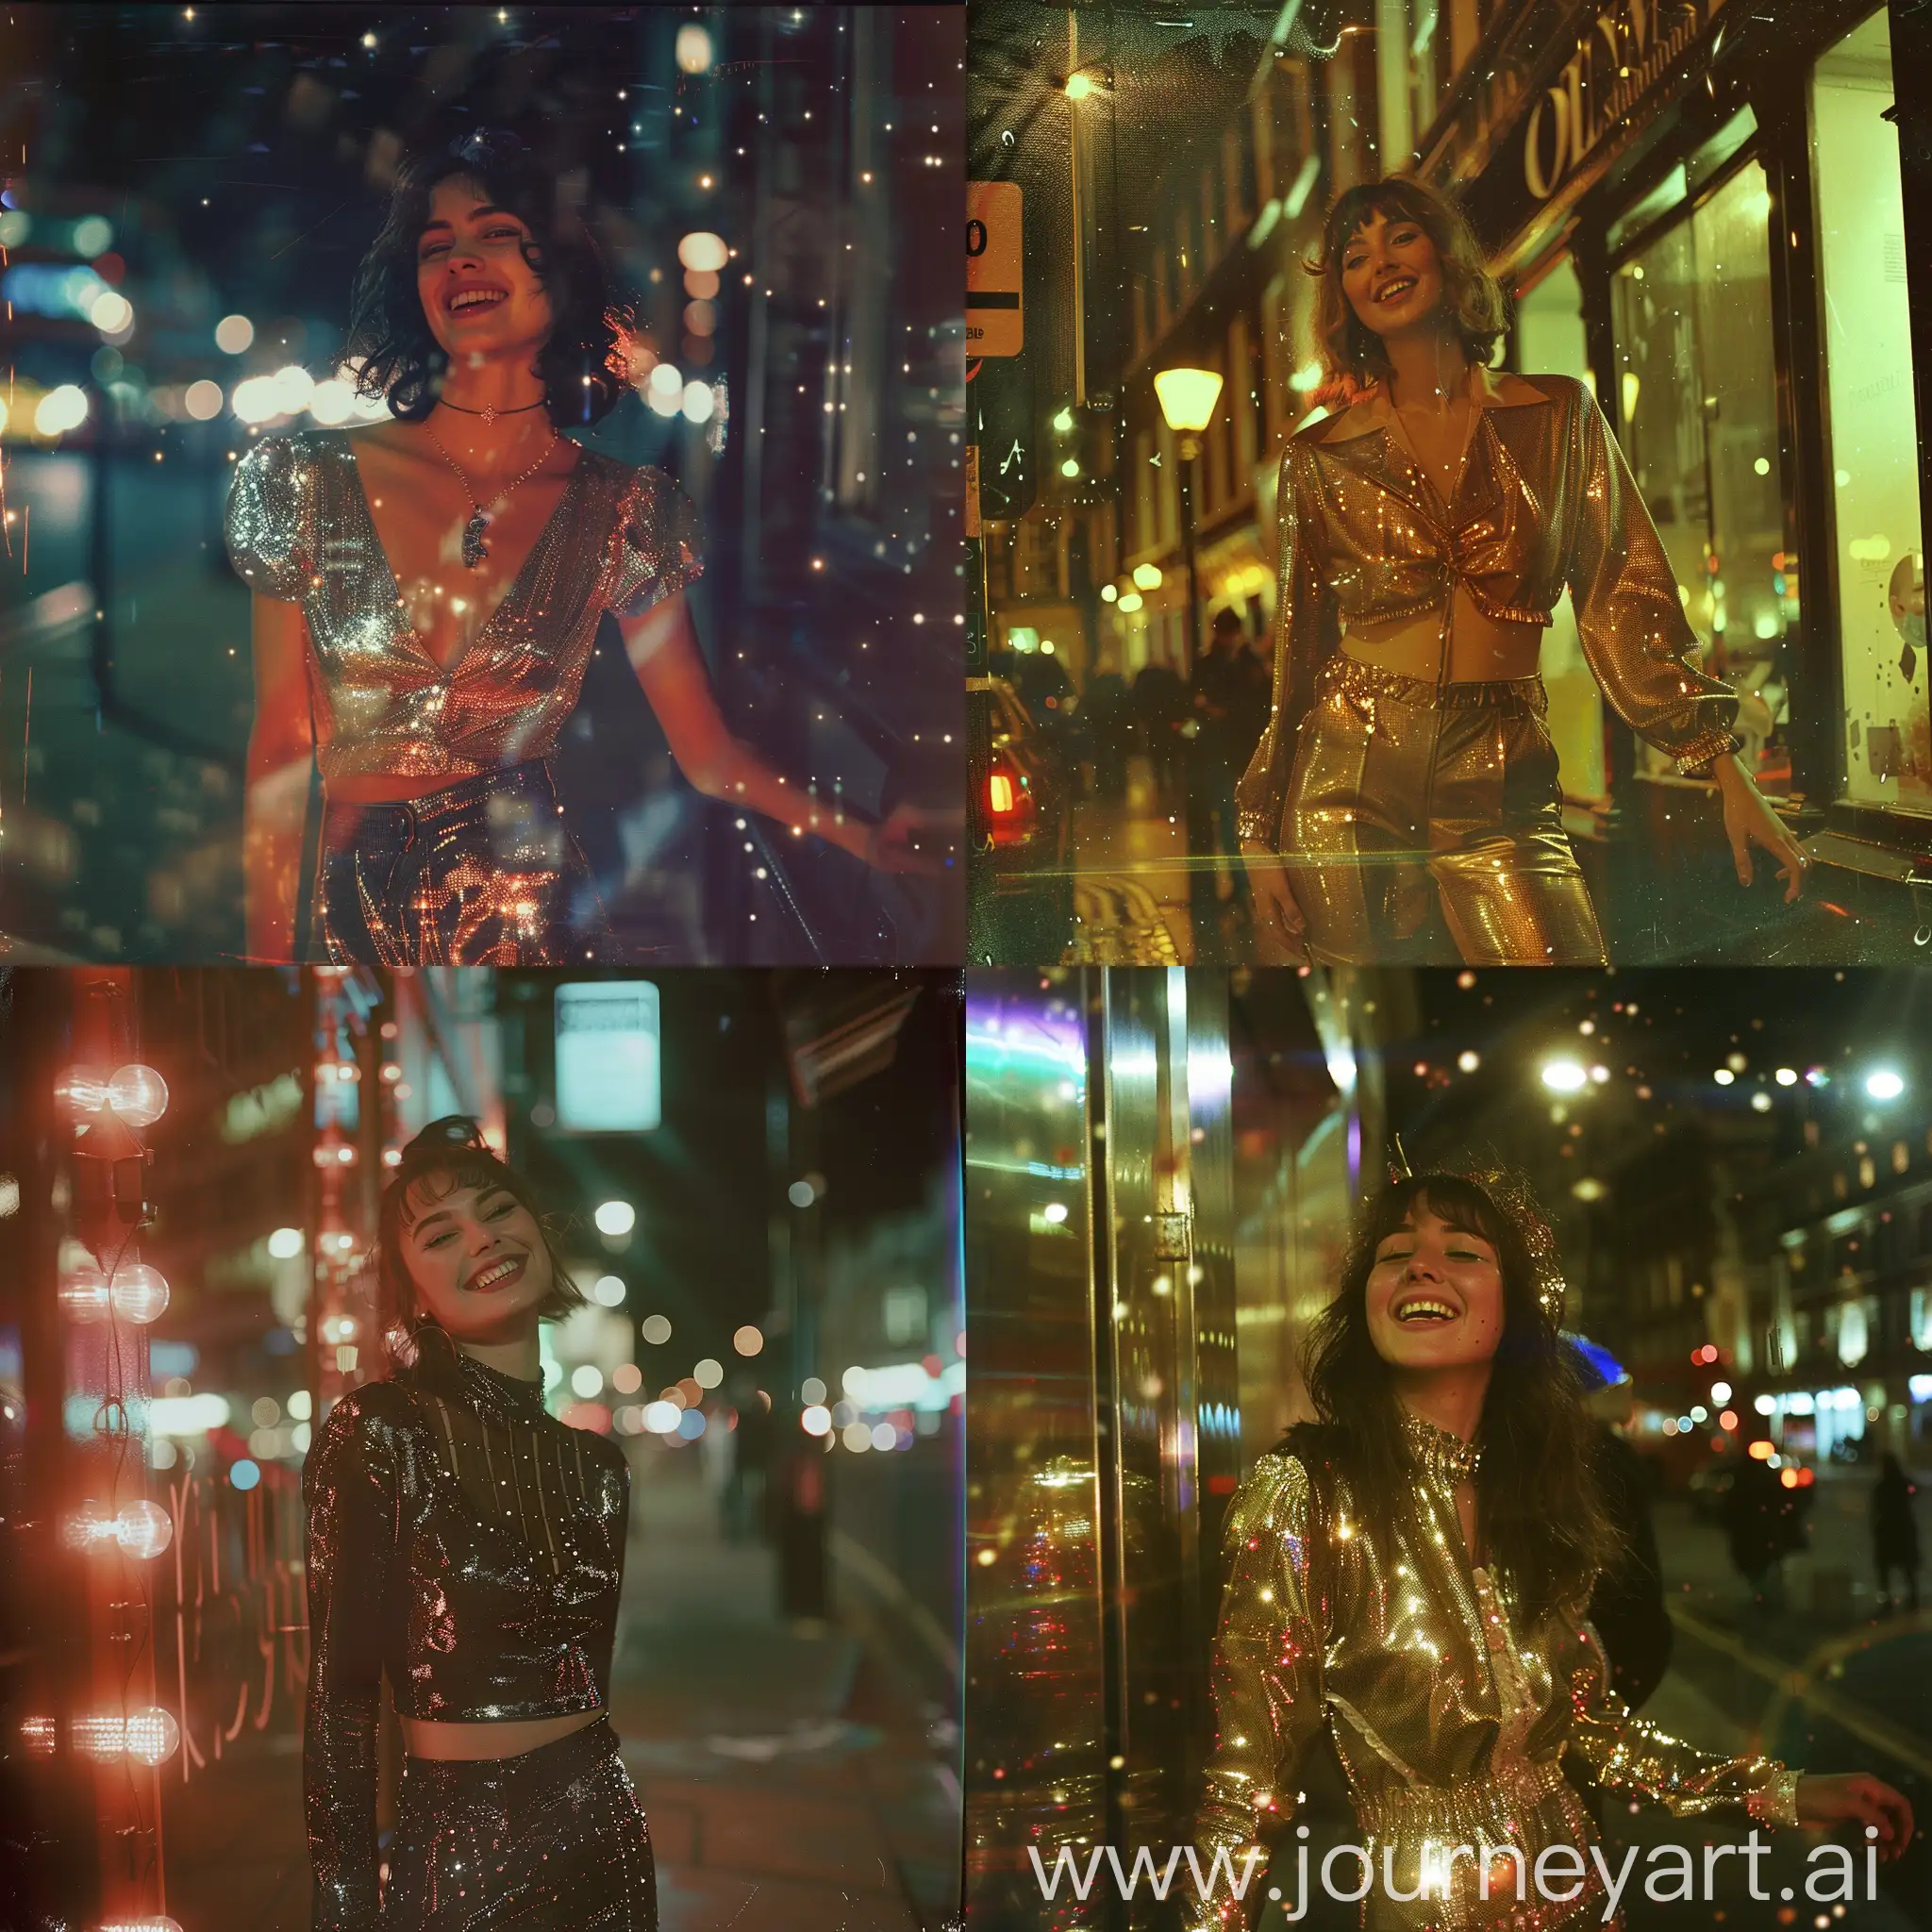 London girl, candid pose, retro shiny outfits, old picture, glitchy and grainy, 100mm, retro camera, grainy photography, night photography, smiling girl, street photography, little glitchy and blurry